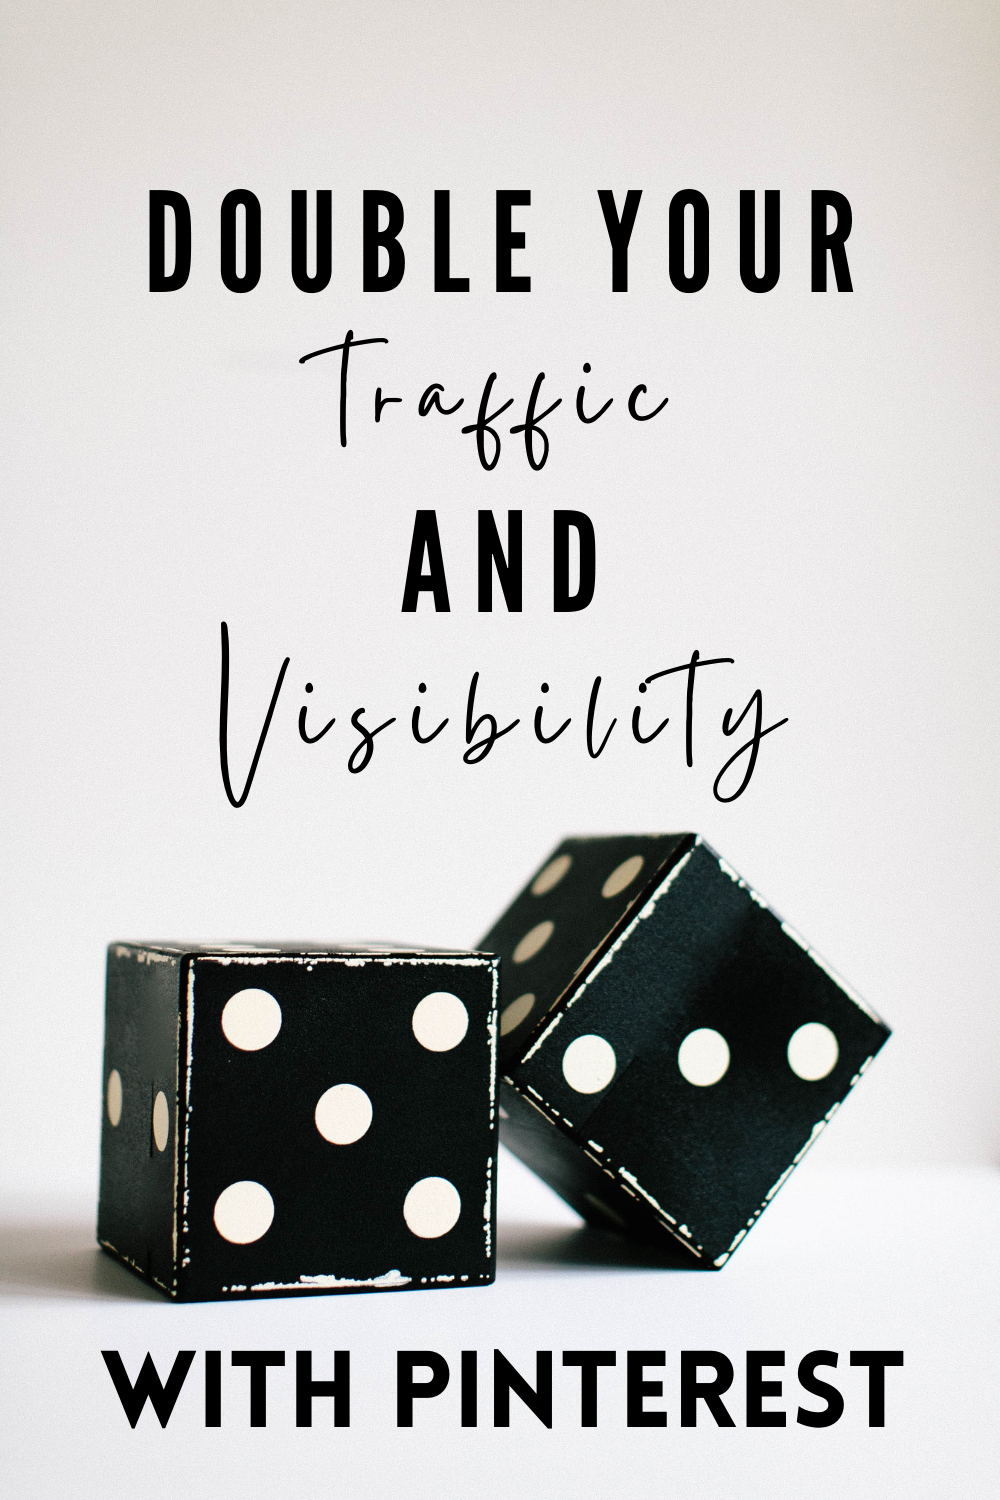 photo of dice with text that reads: double your traffic and visibility with Pinterest